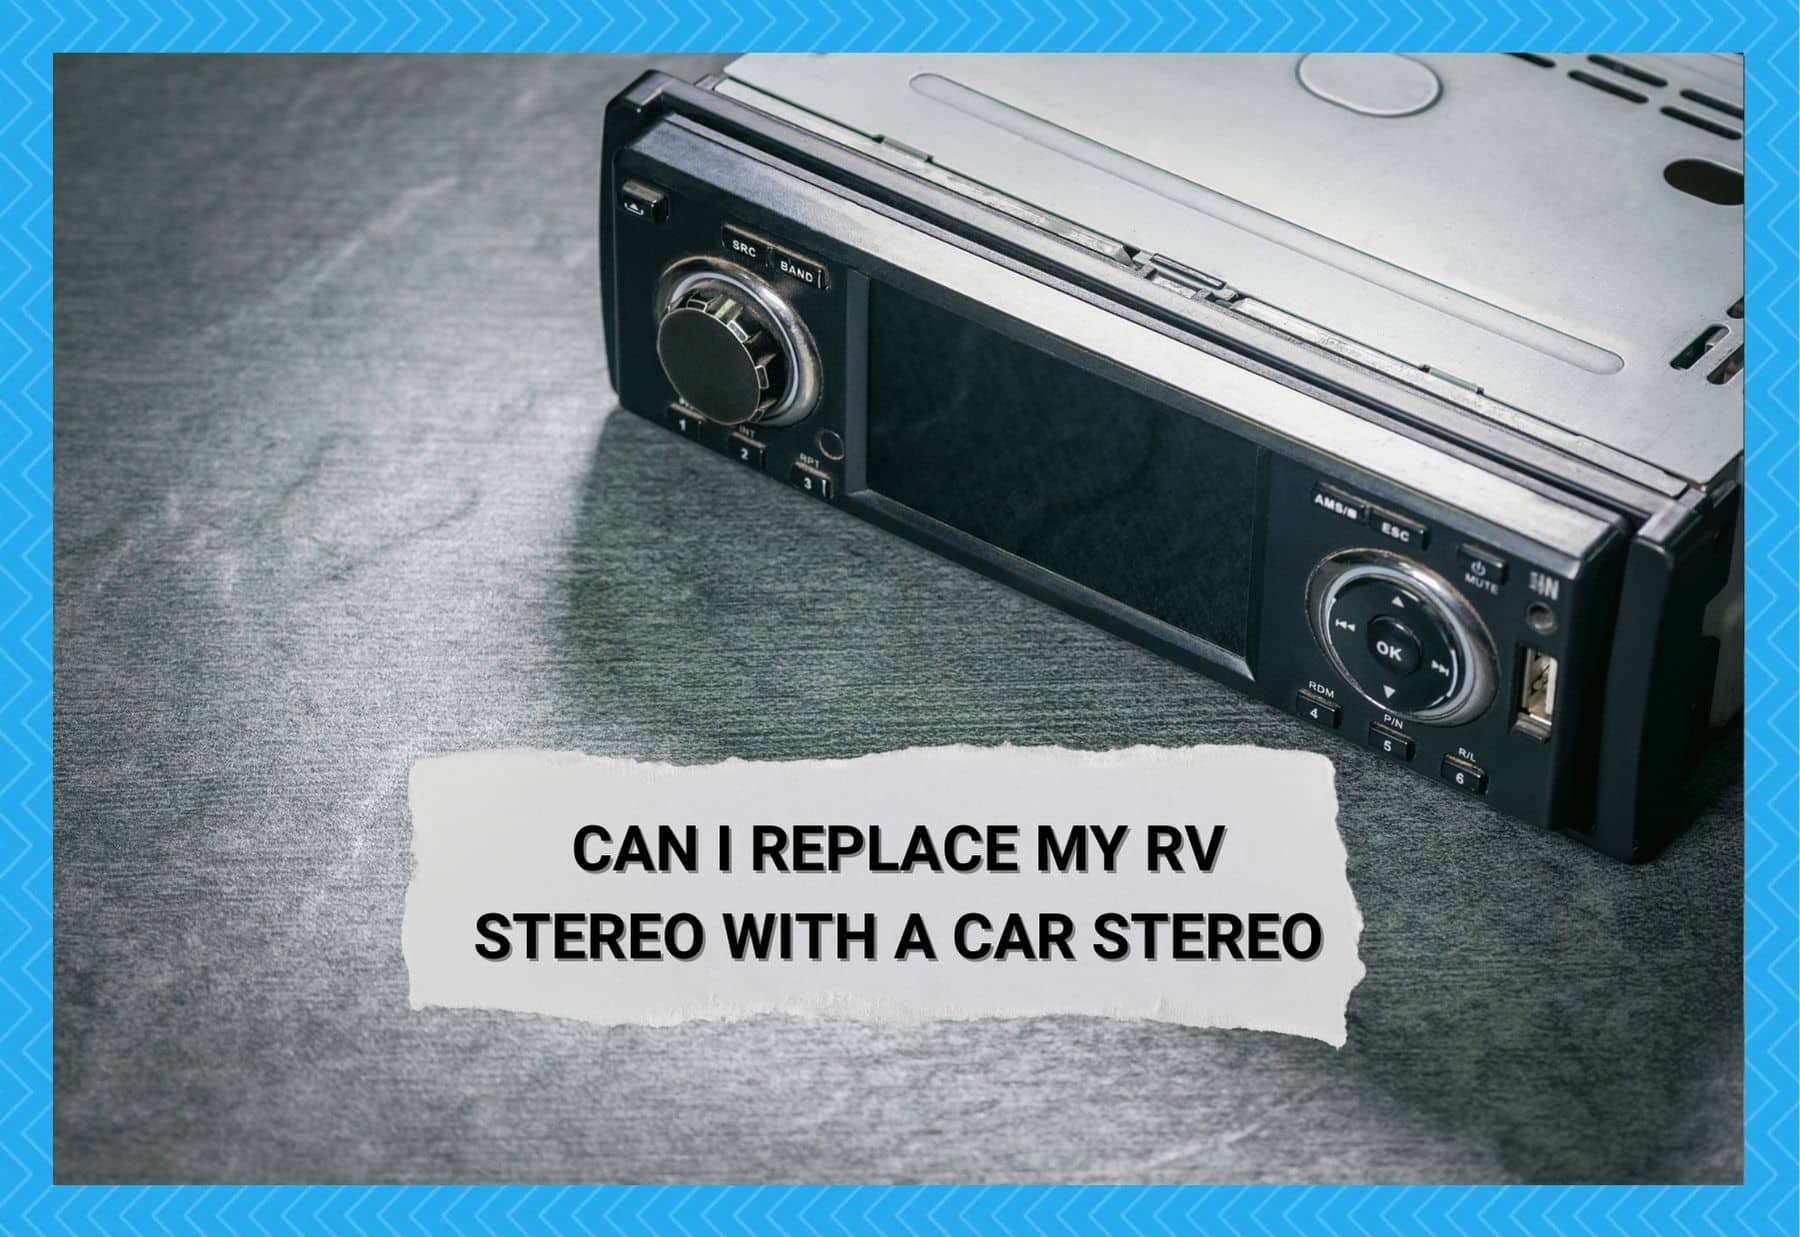 Can I Replace My RV Stereo With A Car Stereo